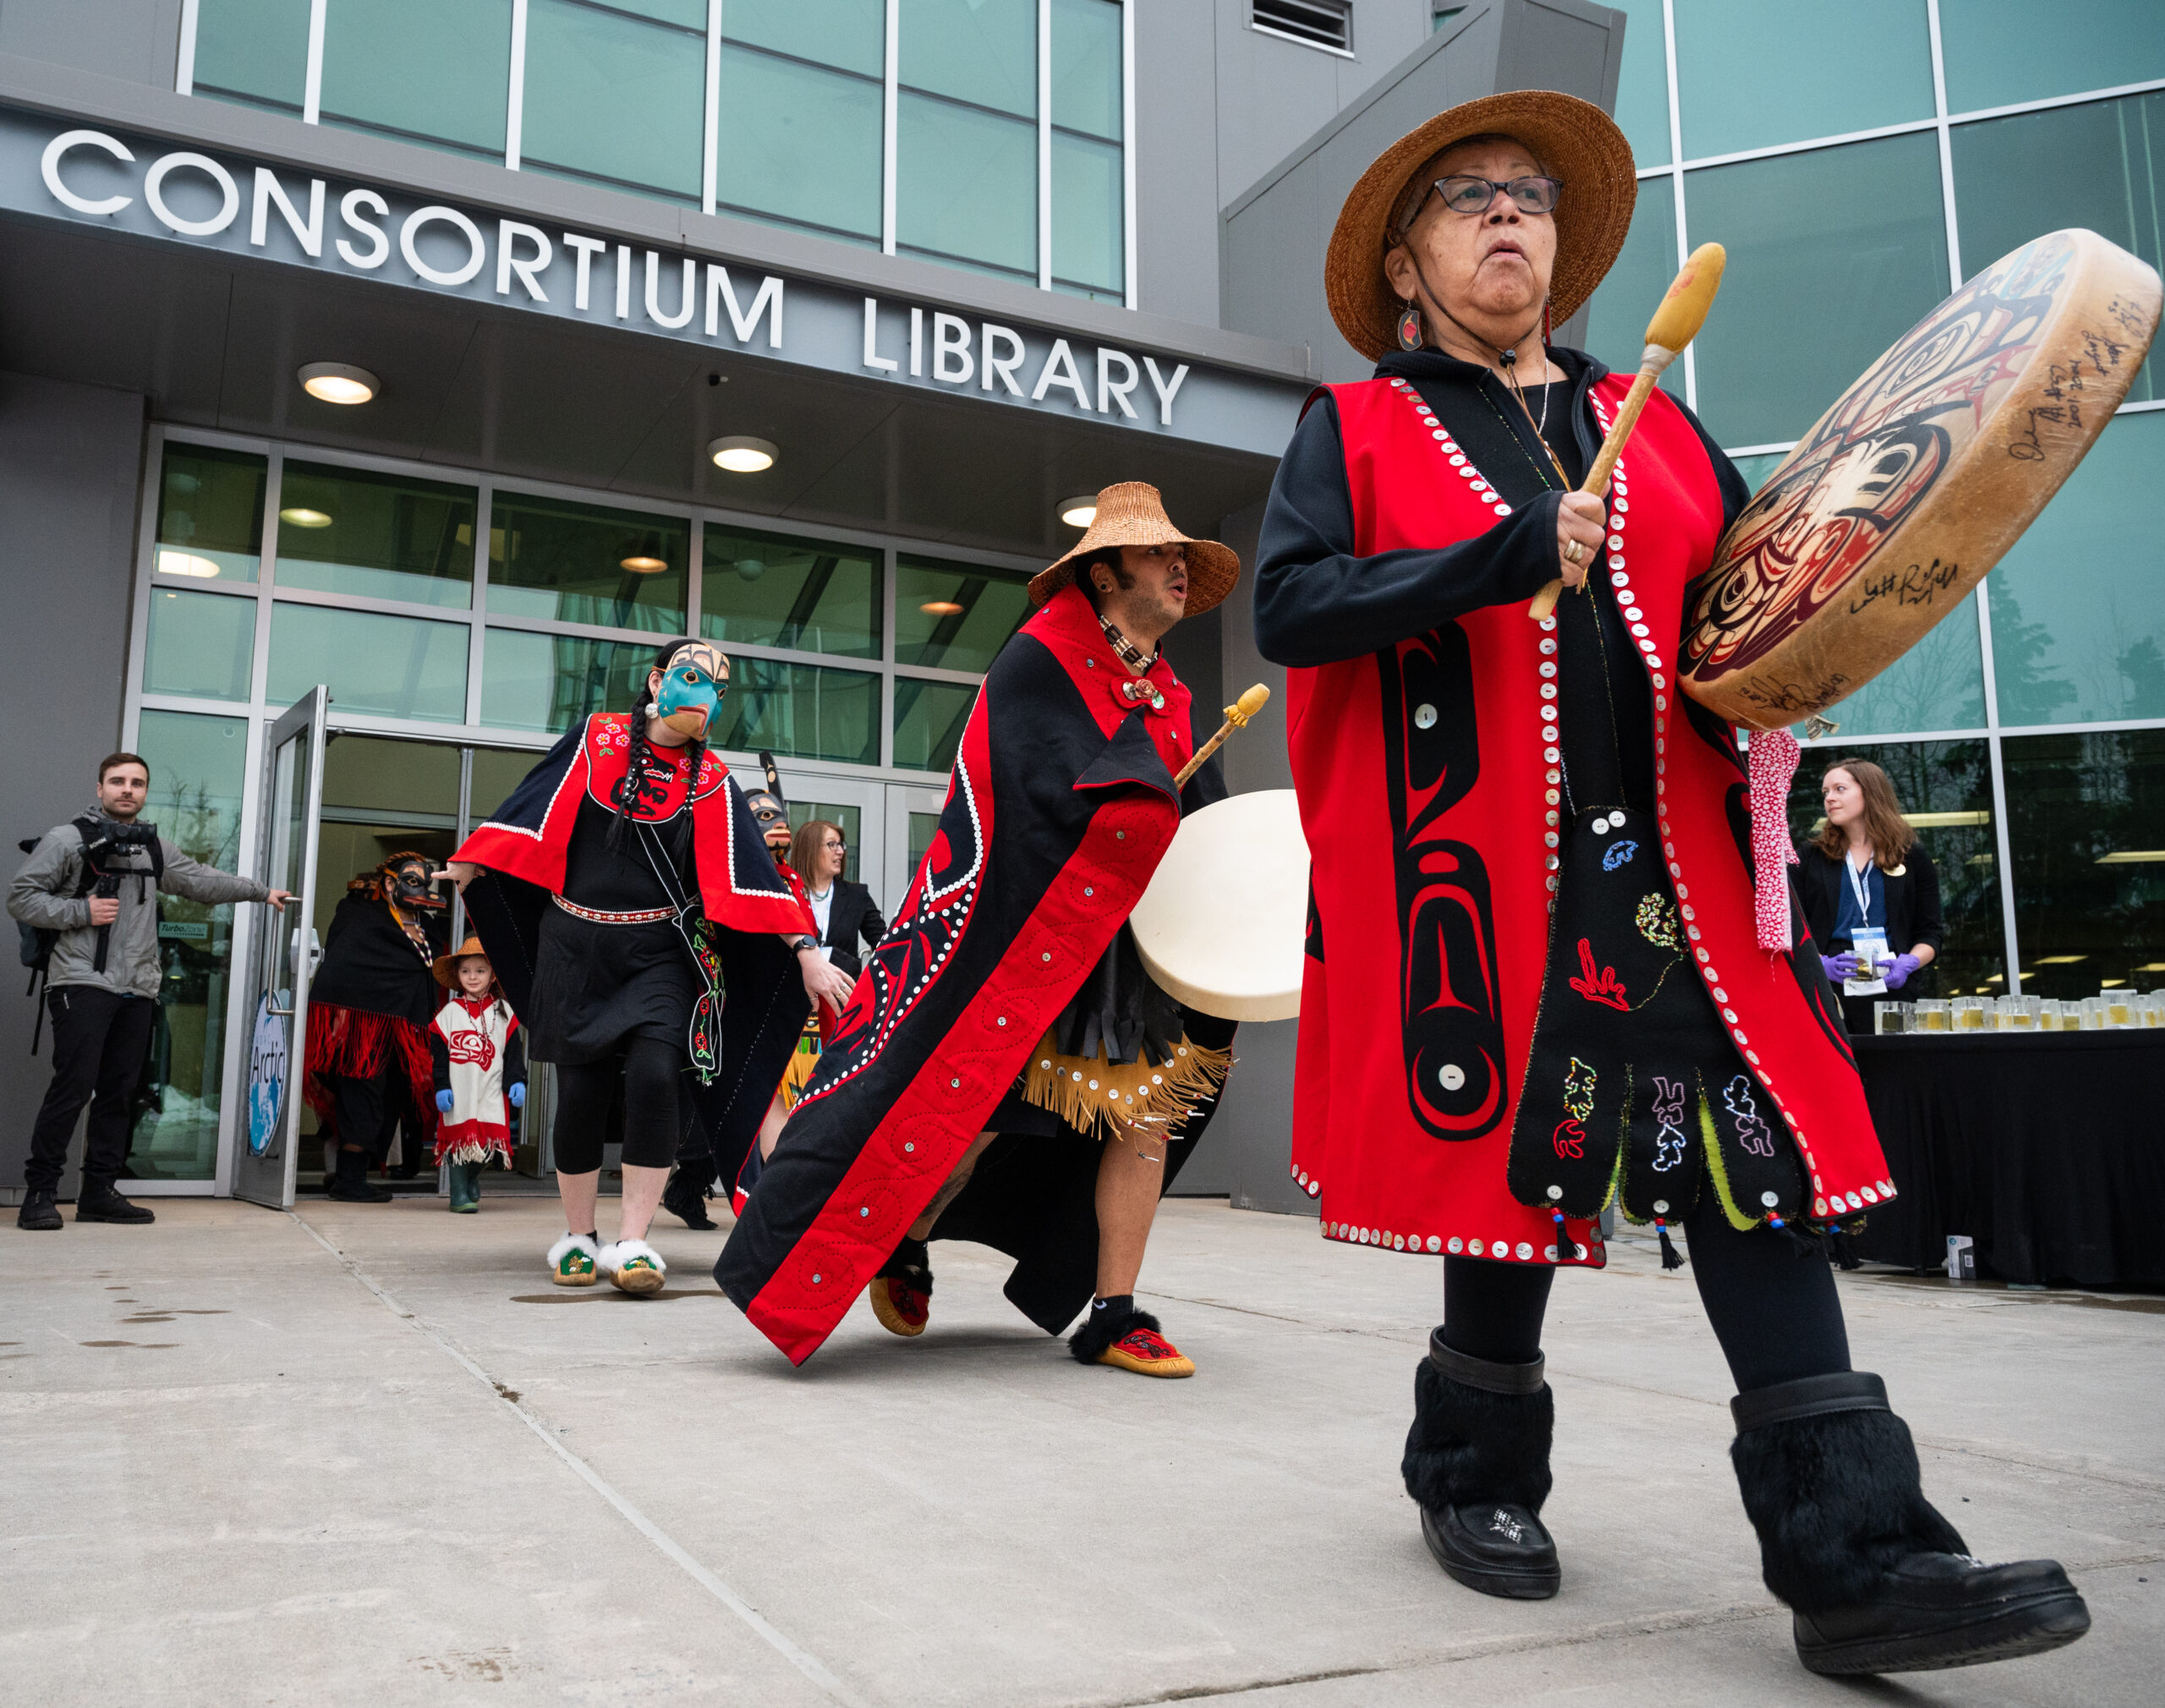 A Tlingit dance group performs in front of an entryway.